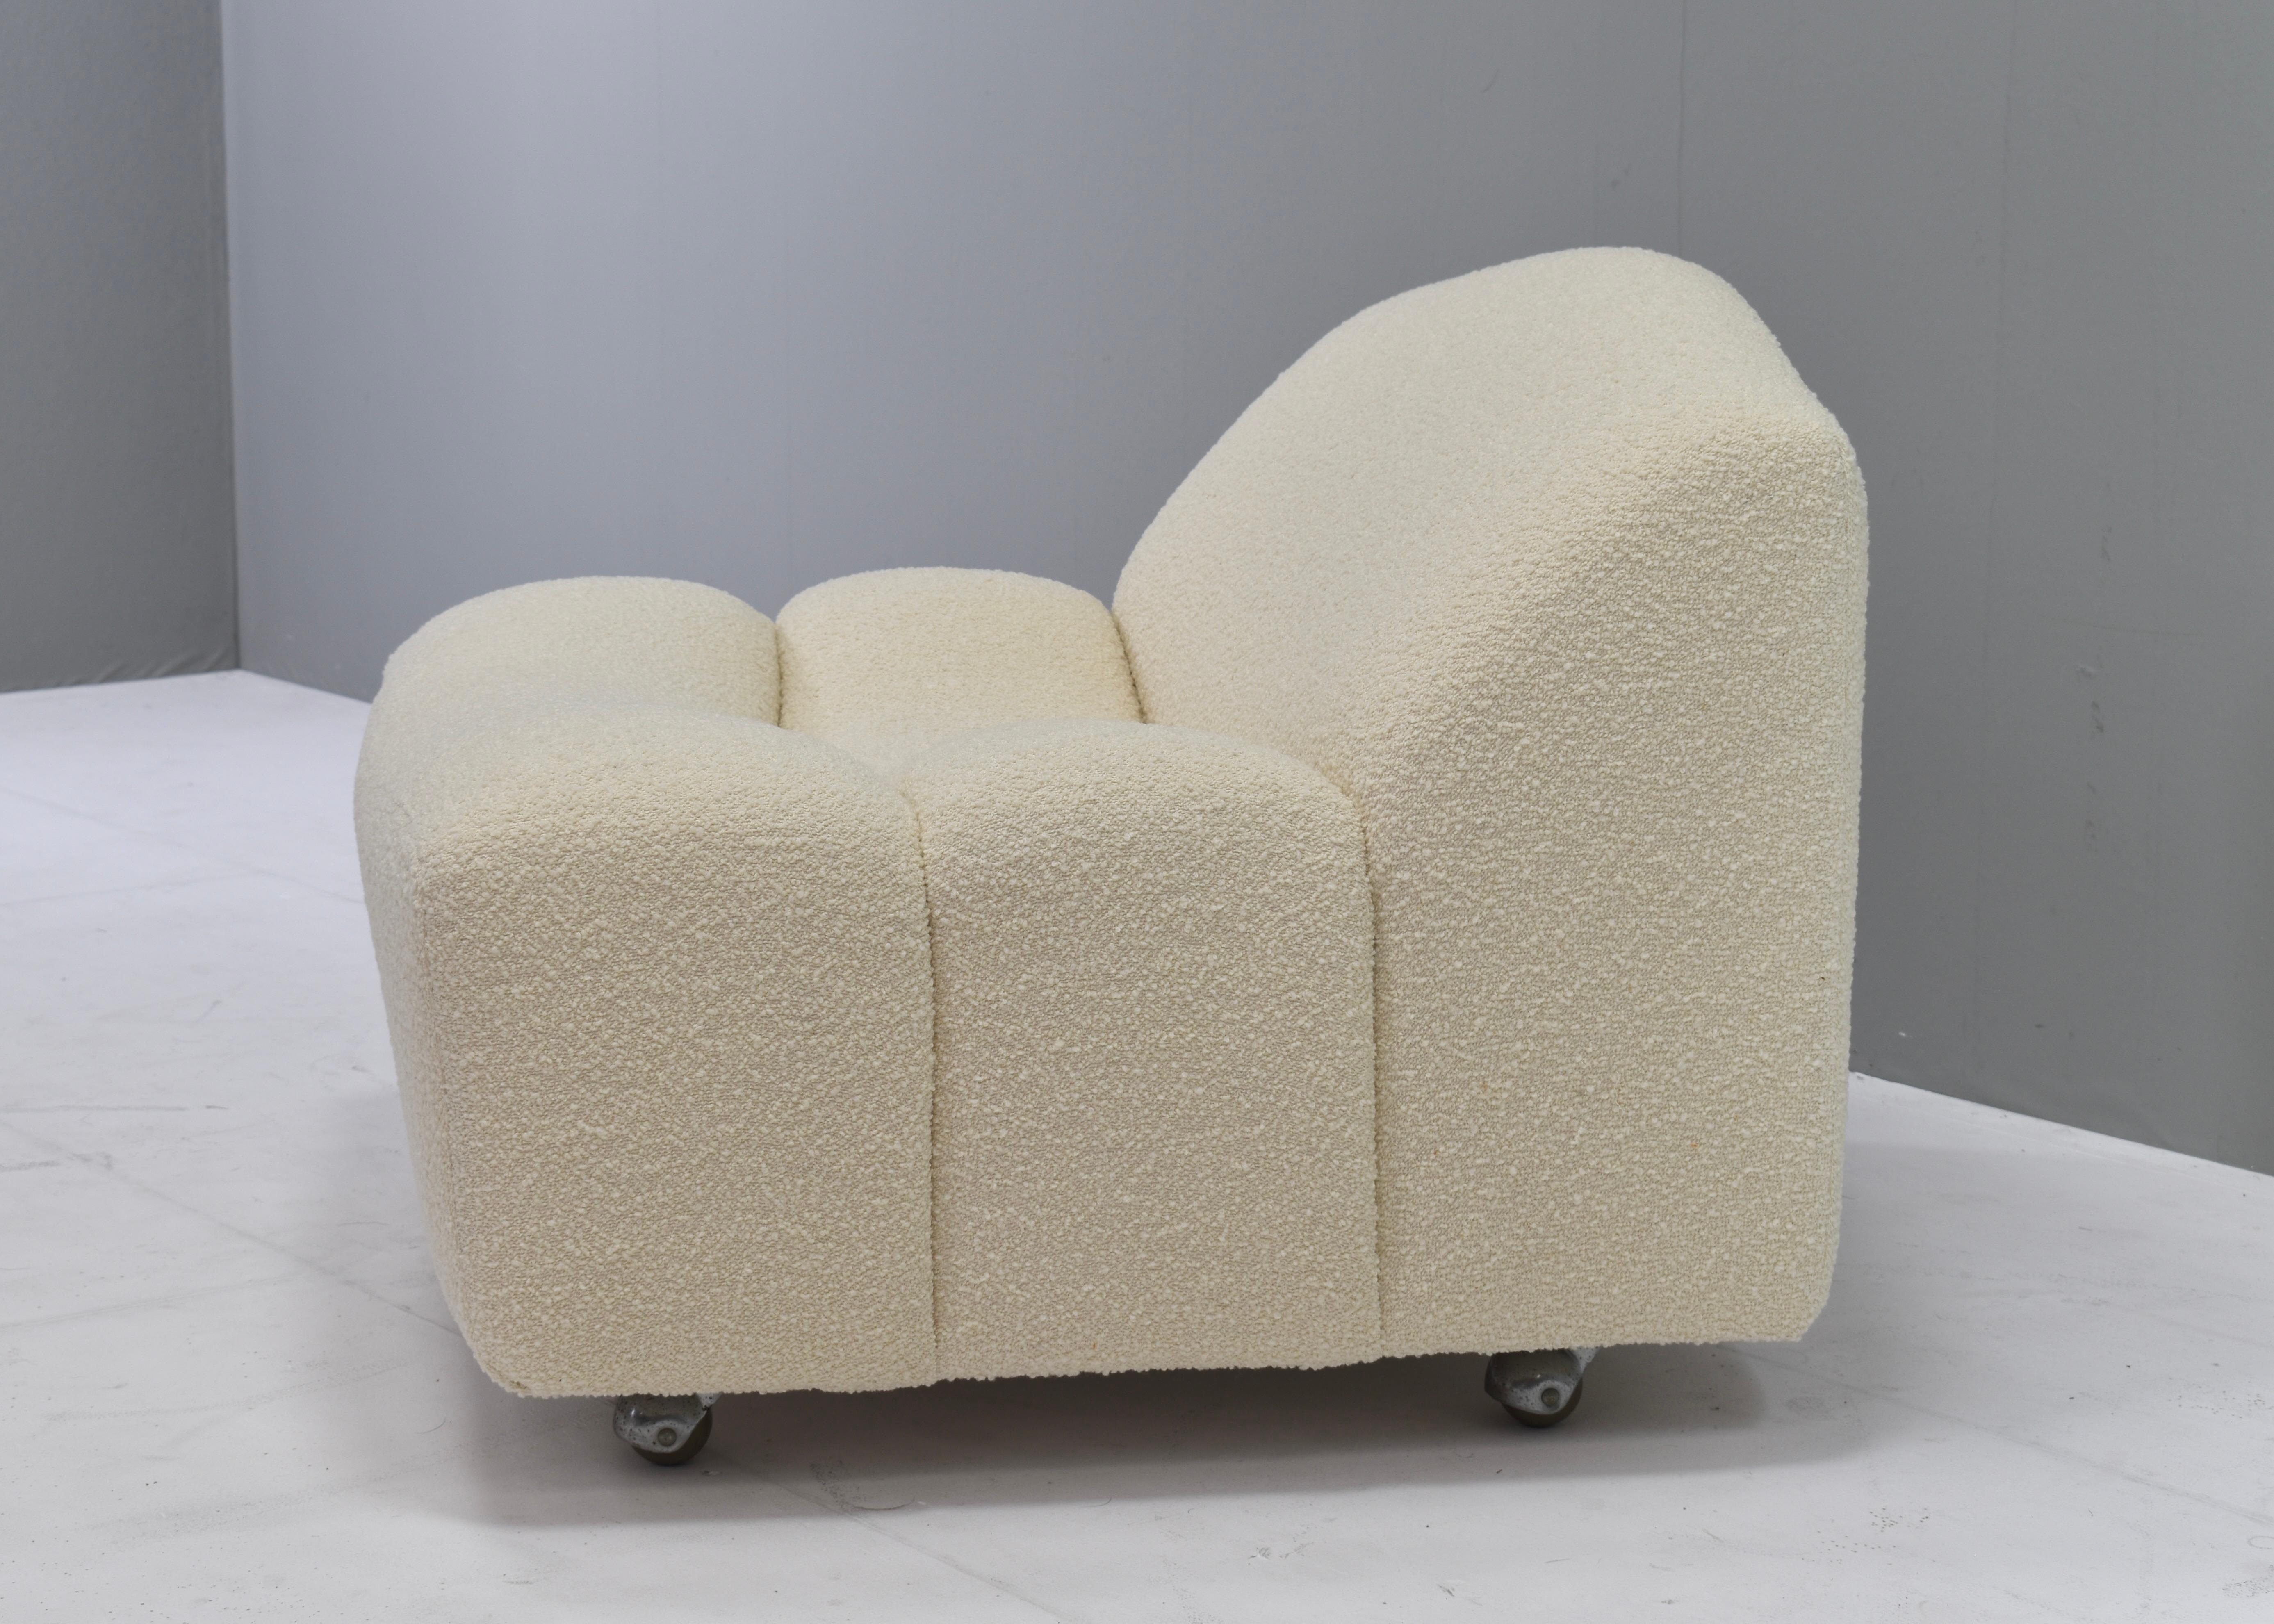 ABCD Armchair by Pierre Paulin for ARTIFORT New Upholstery, Netherlands - 1968 For Sale 1